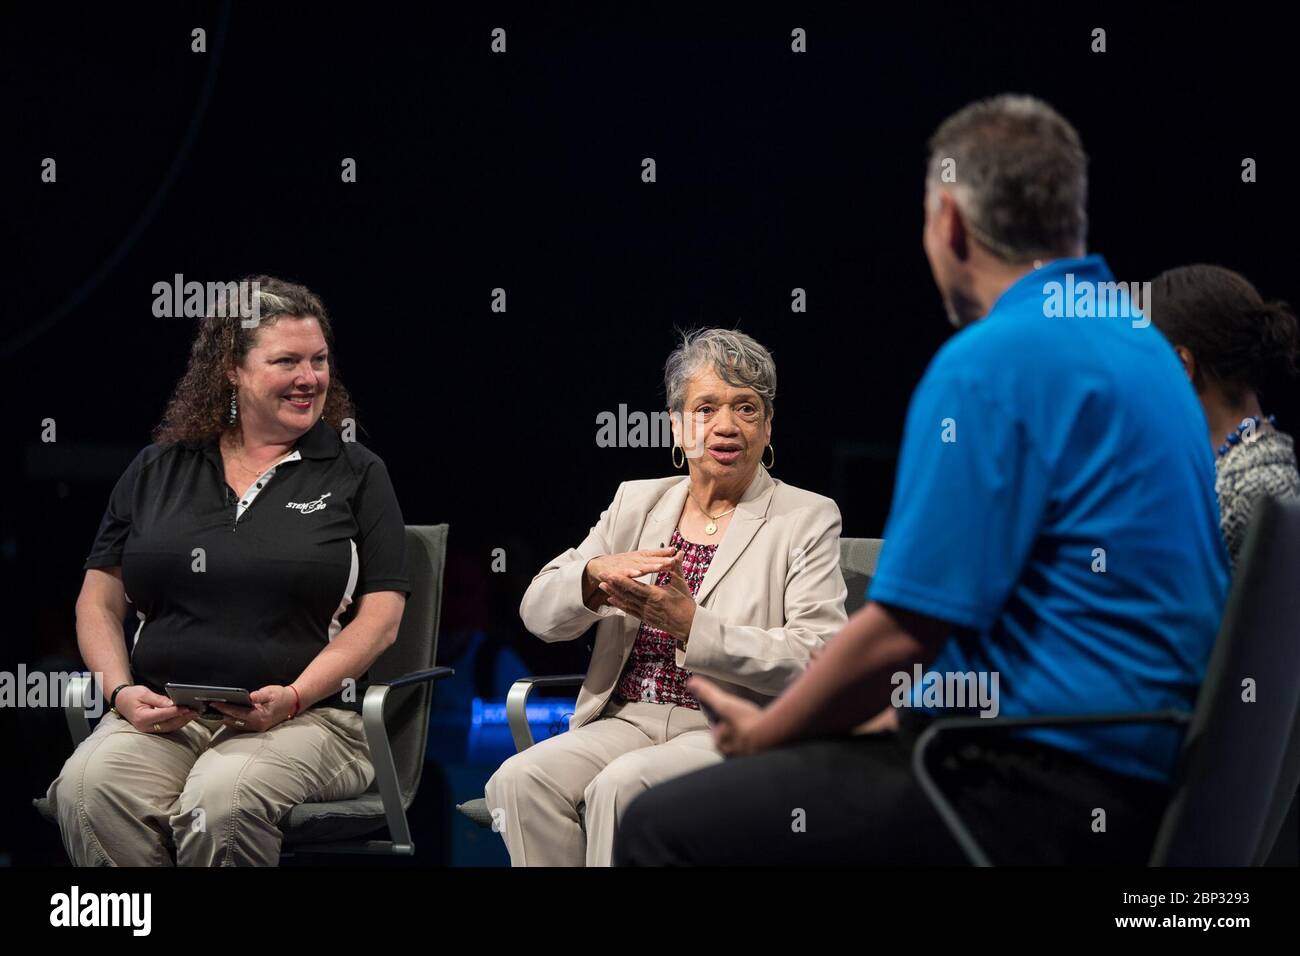 'Hidden Figures' Panel Discussion  NASA human computer Christine Darden, speaks during a &quot;Hidden Figures&quot; panel discussion with &quot;Hidden Figures&quot; author, Margot Lee Shetterly and Beth Wilson, left, and Marty Kelsey, right, of STEM in 30, Wednesday, June 12, 2019 at the Smithsonian National Air and Space Museum in Washington. The panel discussion took place after a ceremony dedicating the 300 block of E Street SW as &quot;Hidden Figures Way&quot; to honor Katherine Johnson, Dorothy Vaughan, Mary Jackson and all of the women who have dedicated their lives to honorably serving Stock Photo